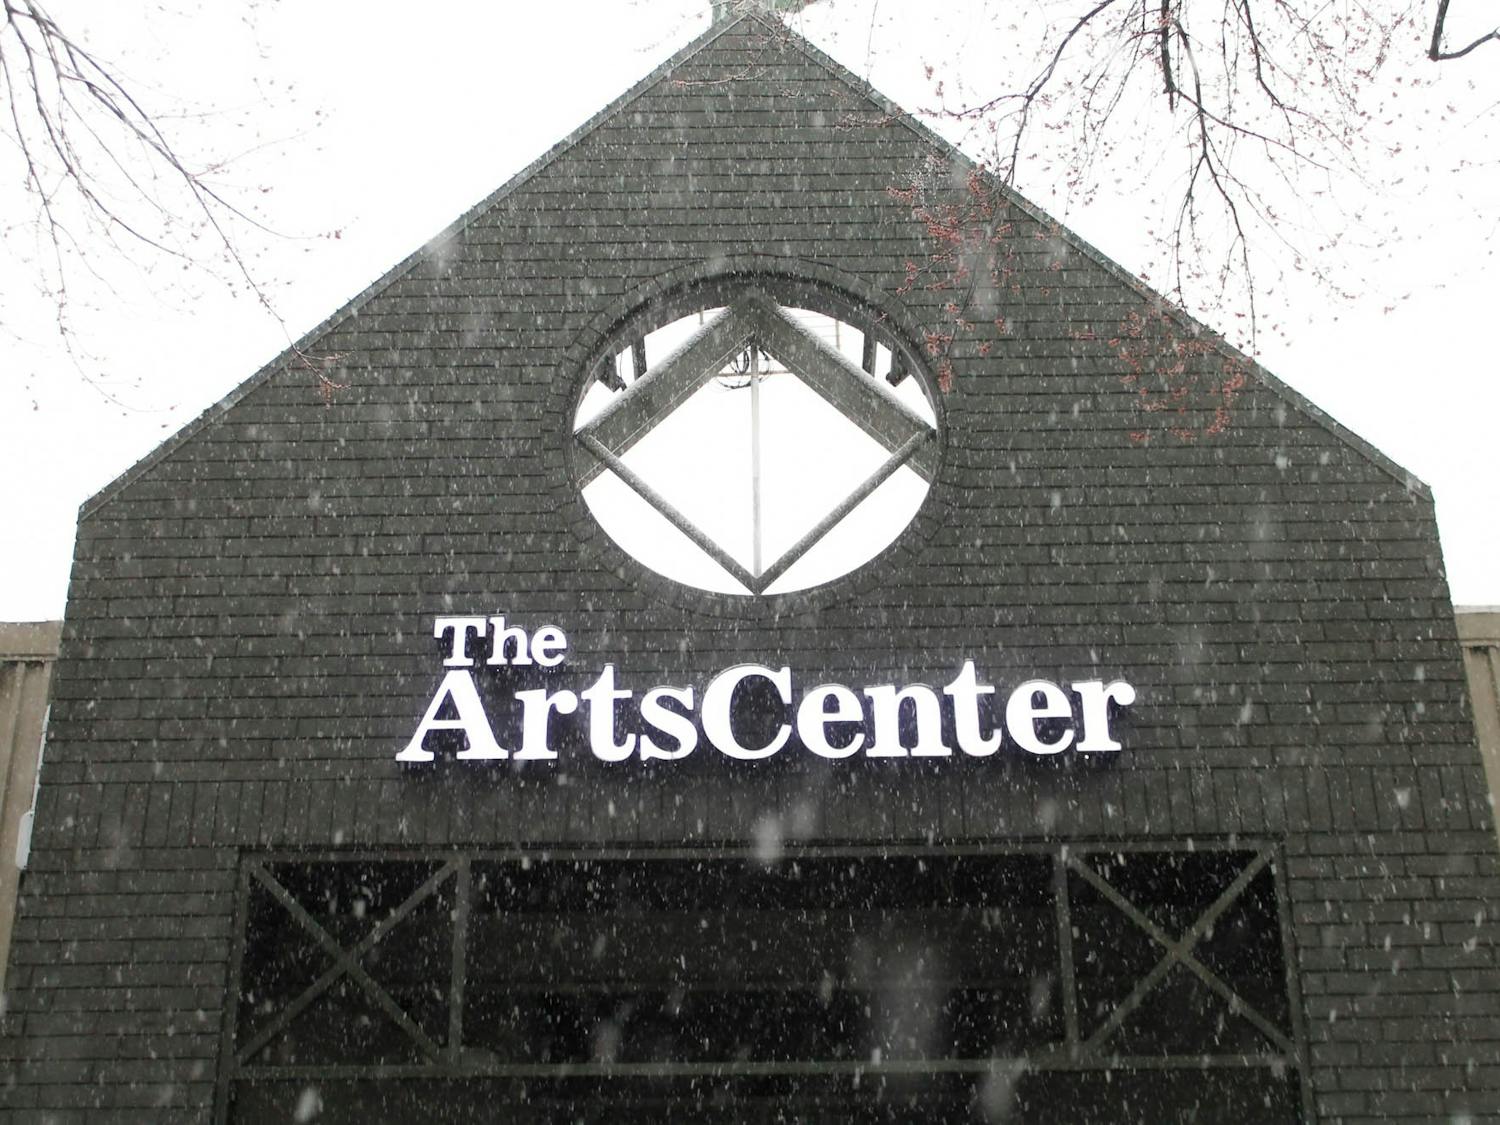 The ArtsCenter located at 300 E Main Street in Carrboro, pictured on Feb. 20, 2020. The Pauper Players will be hosting performances at the ArtsCenter from Feb. 20-23.